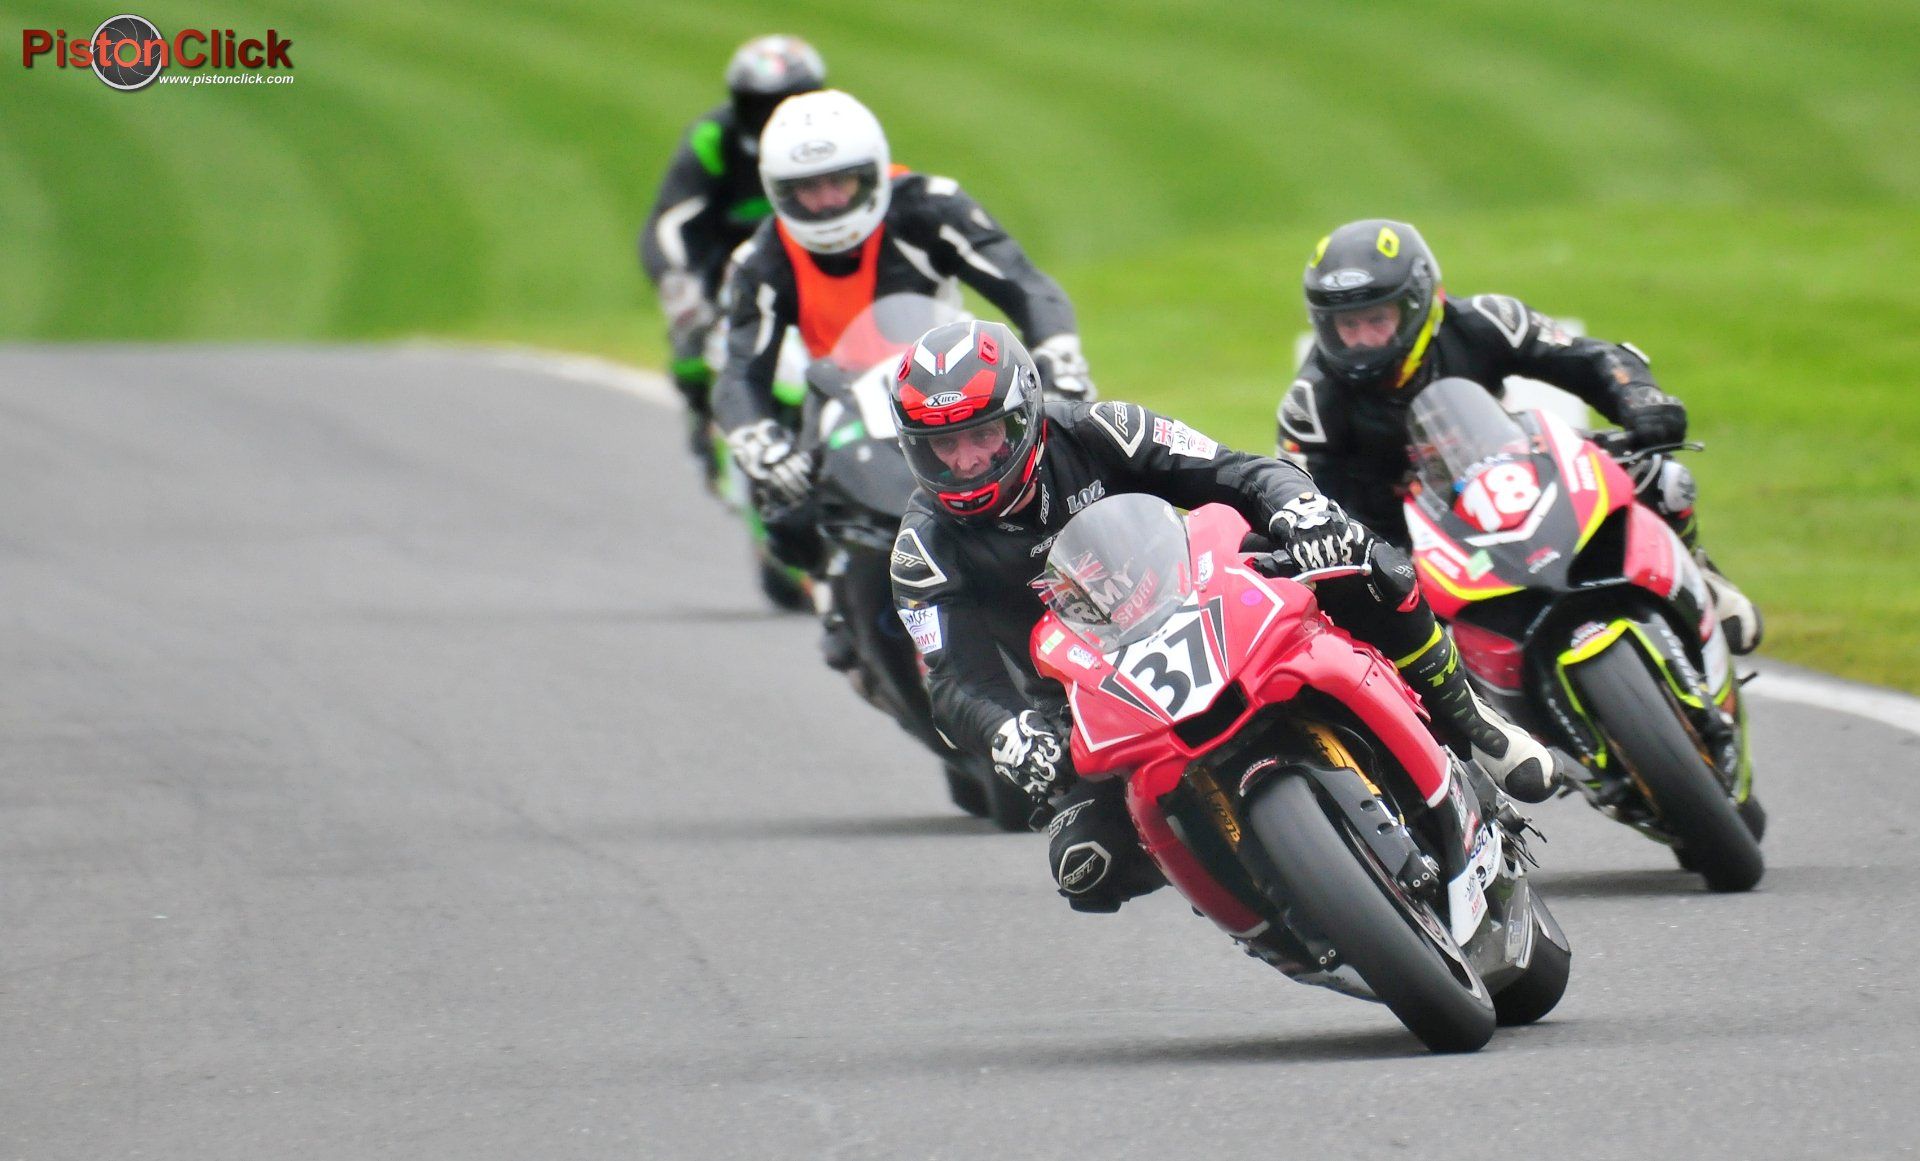 Army Motorcycle Racing